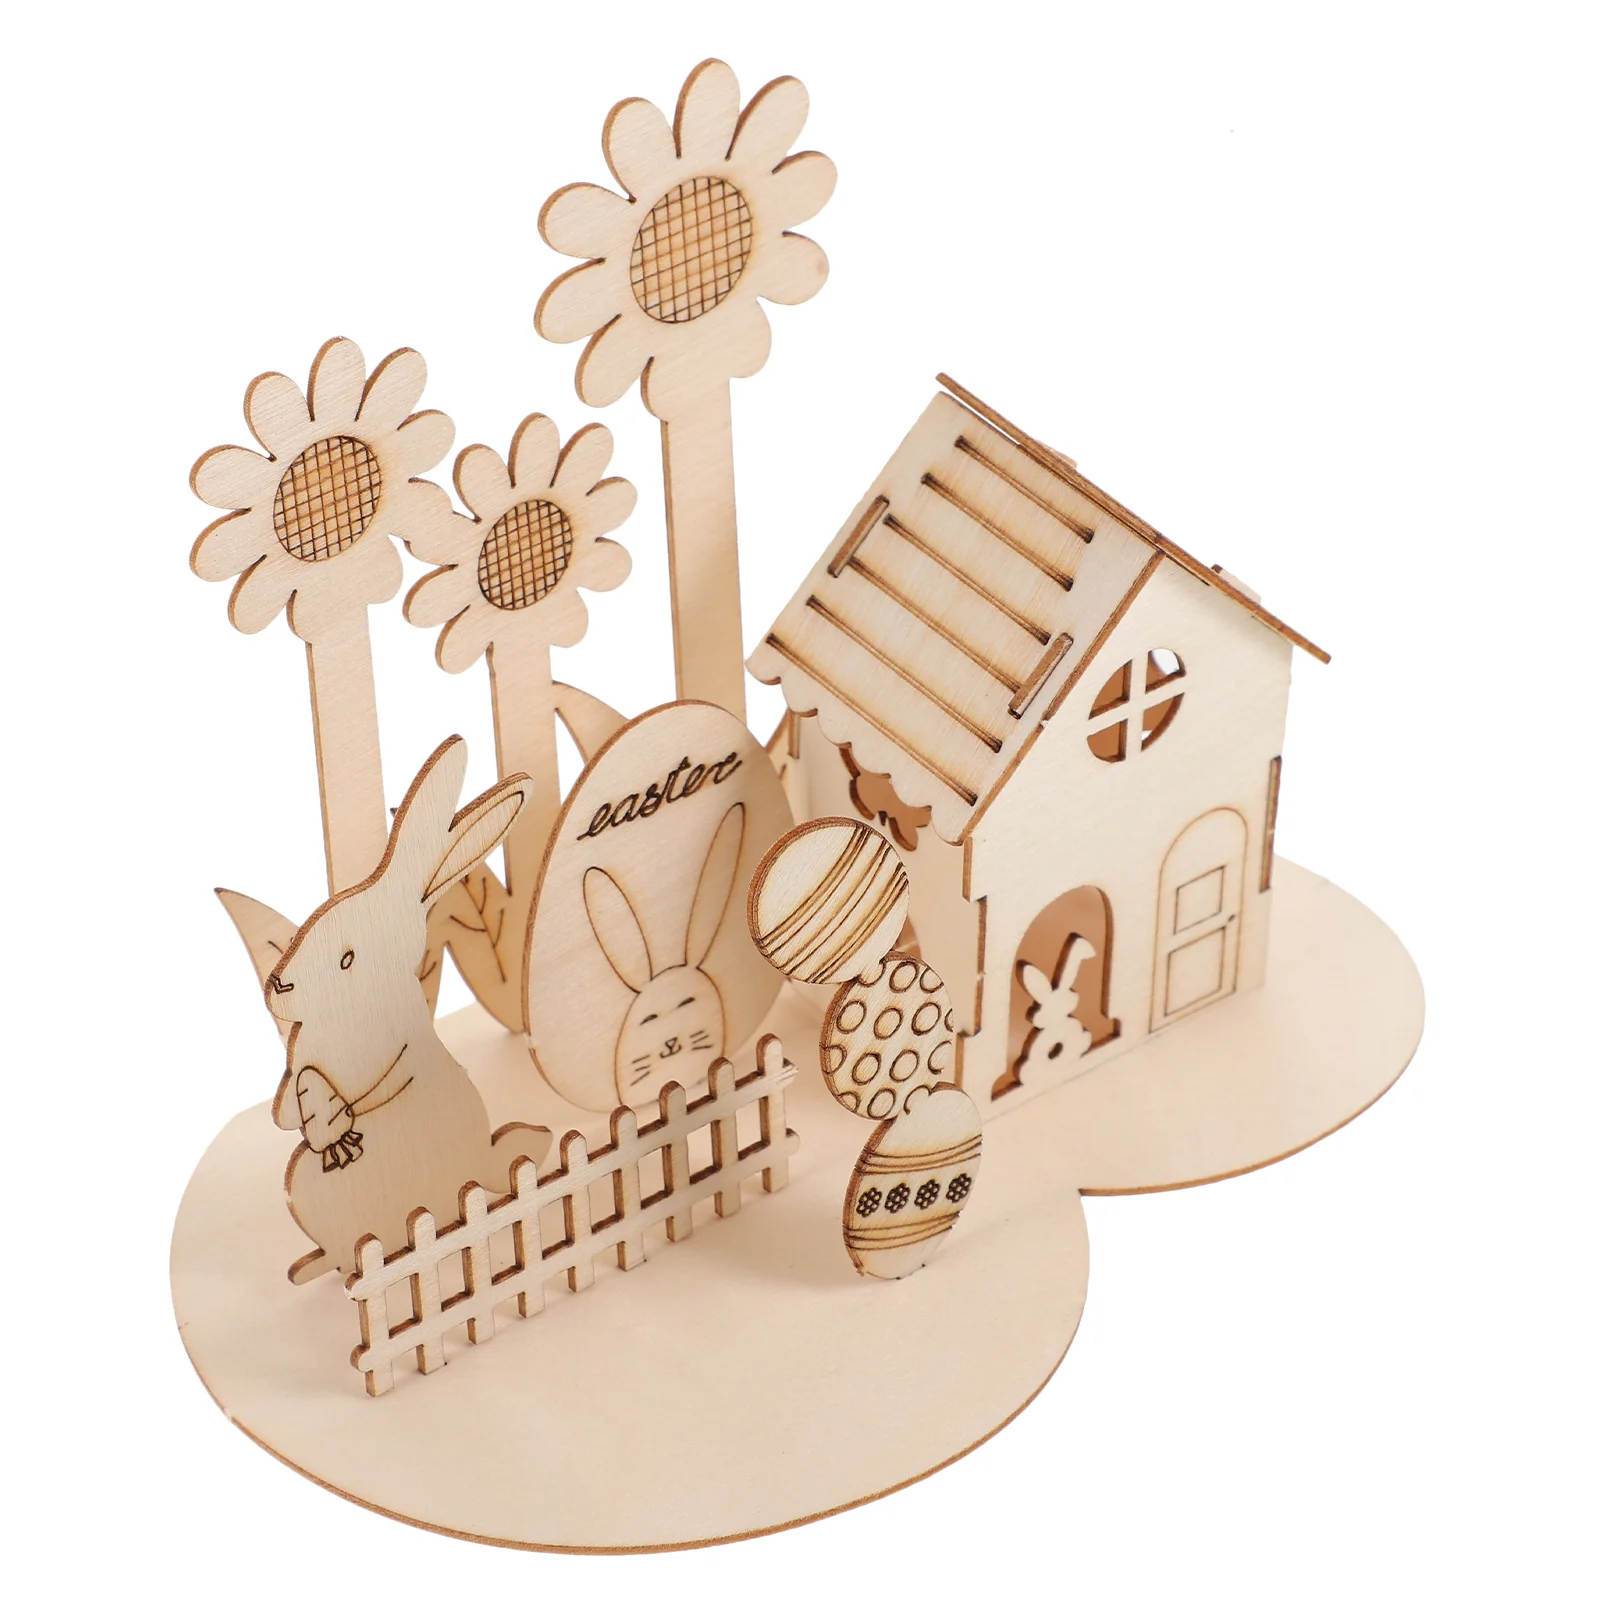 

3D Puzzle Rabbit Children Toys Wood Puzzles for Easter Kids Wooden Toddlers Ages 1-3